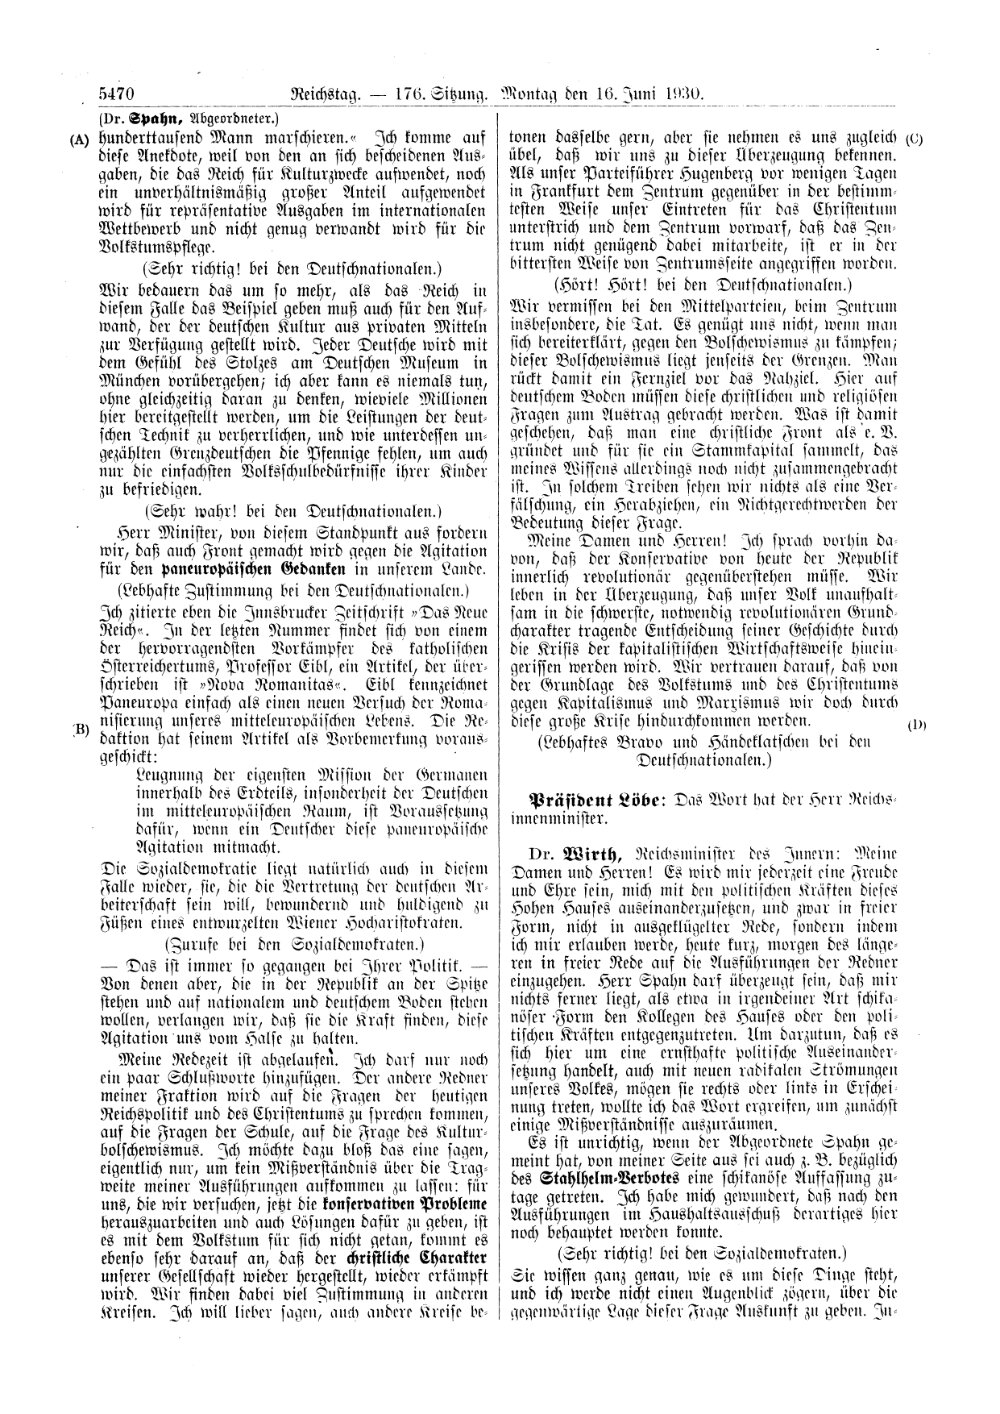 Scan of page 5470